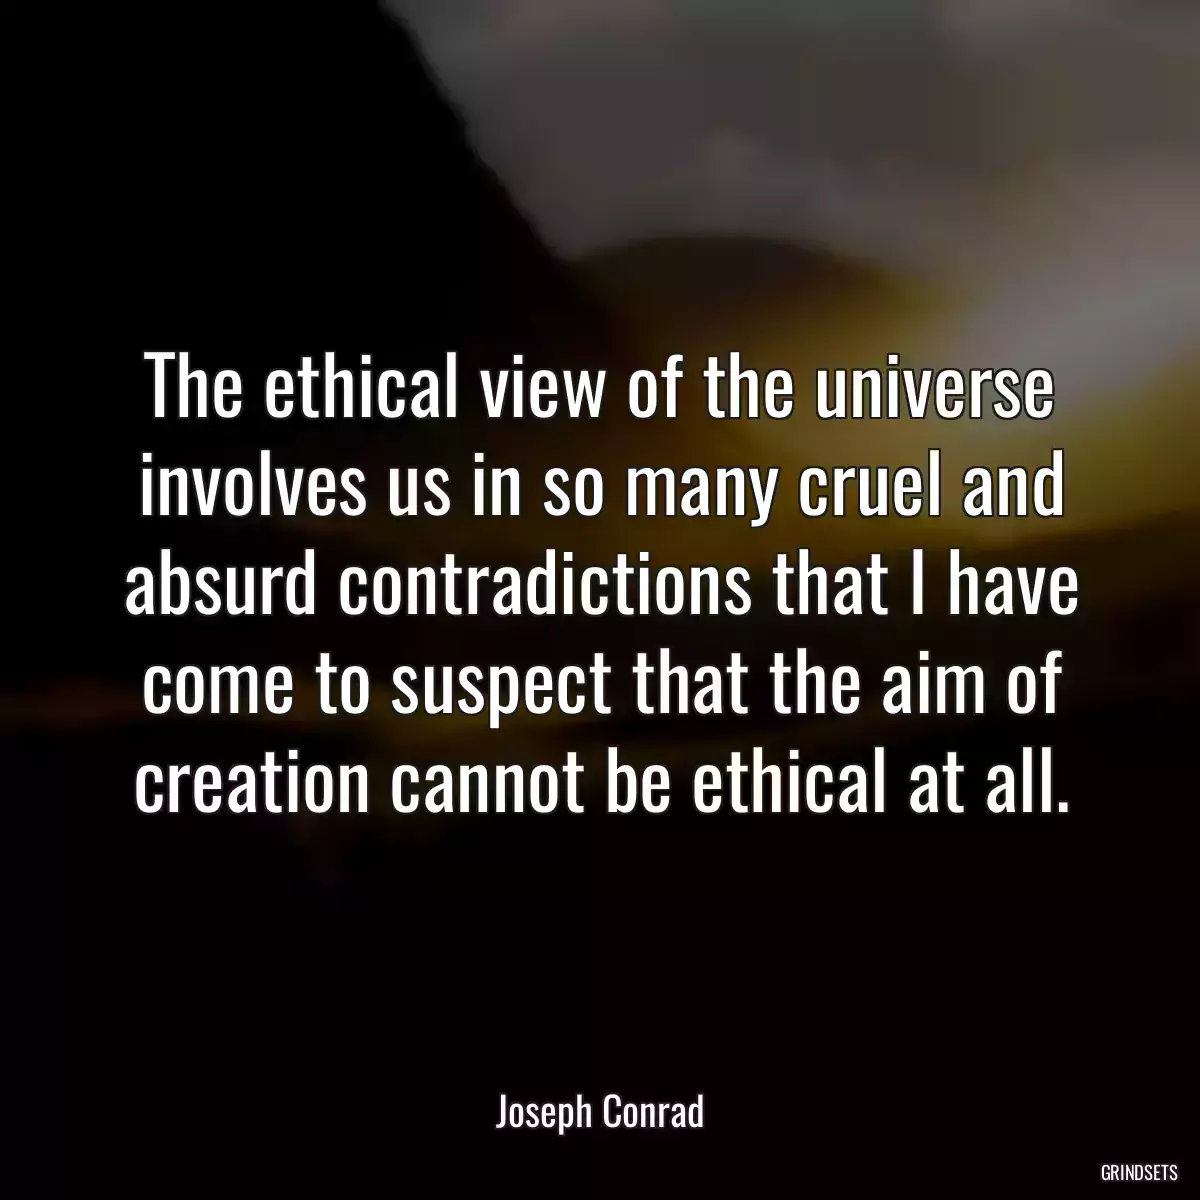 The ethical view of the universe involves us in so many cruel and absurd contradictions that I have come to suspect that the aim of creation cannot be ethical at all.